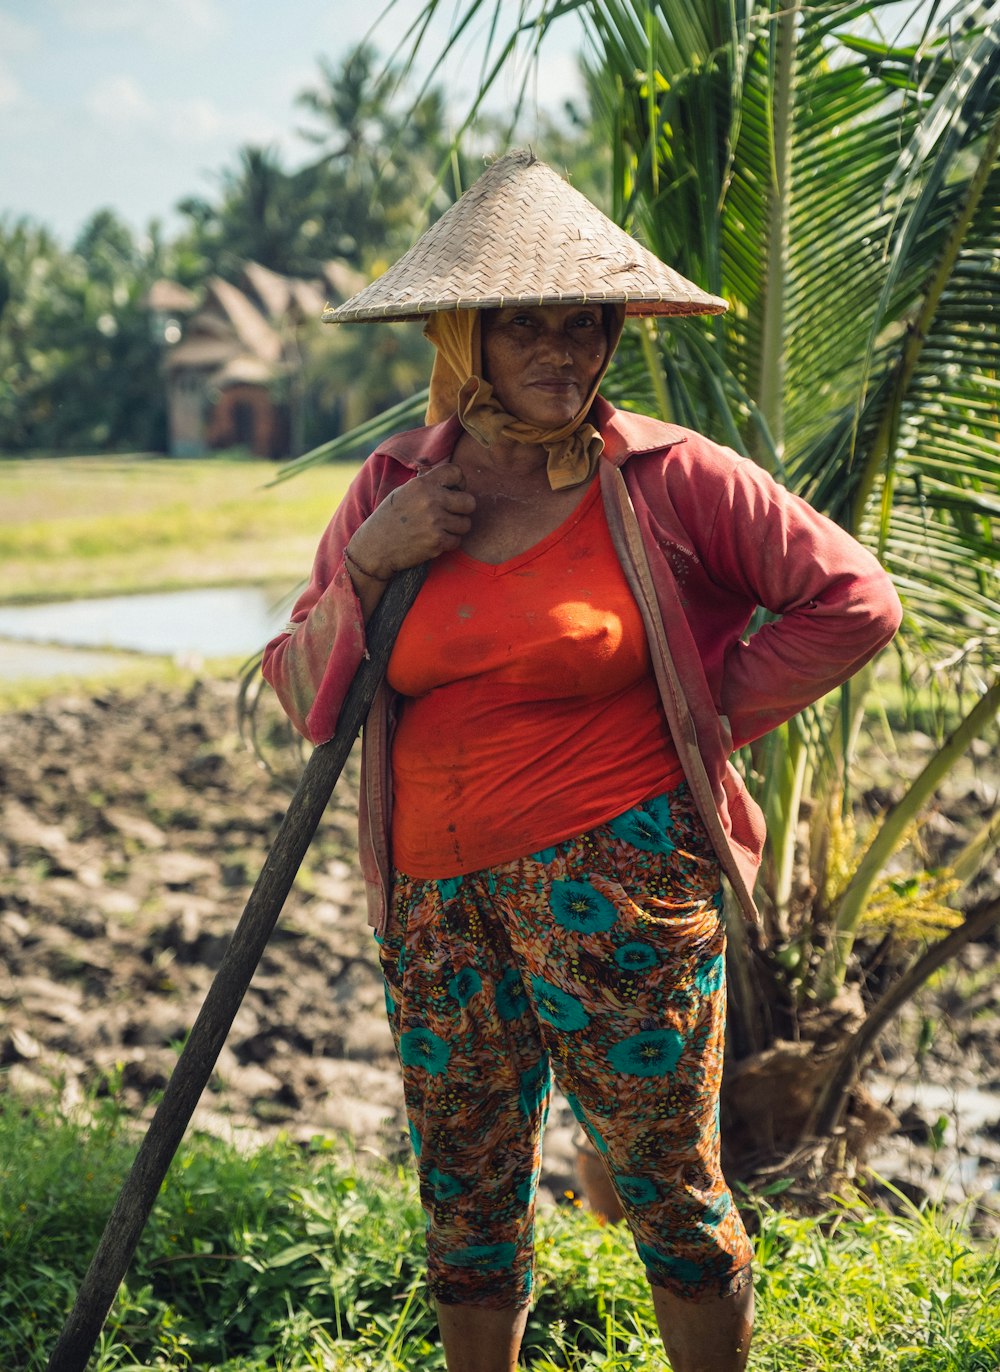 woman wearing red top standing beside coconut plant